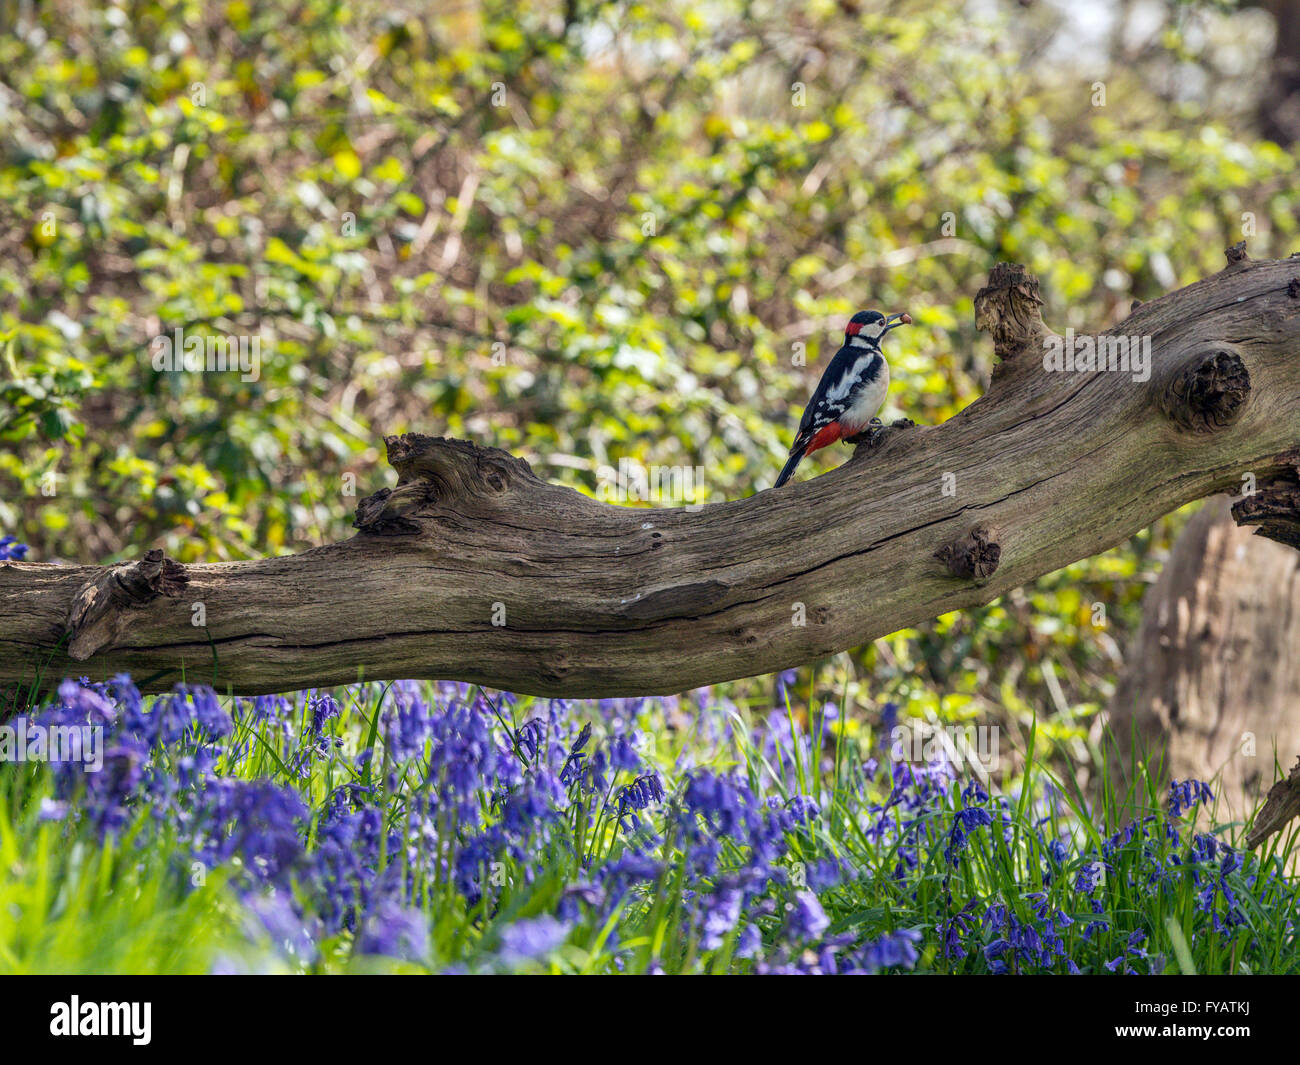 Great Spotted Woodpecker (Dendrocopos major) foraging in natural woodland setting., surrounded by Blue Bells Stock Photo